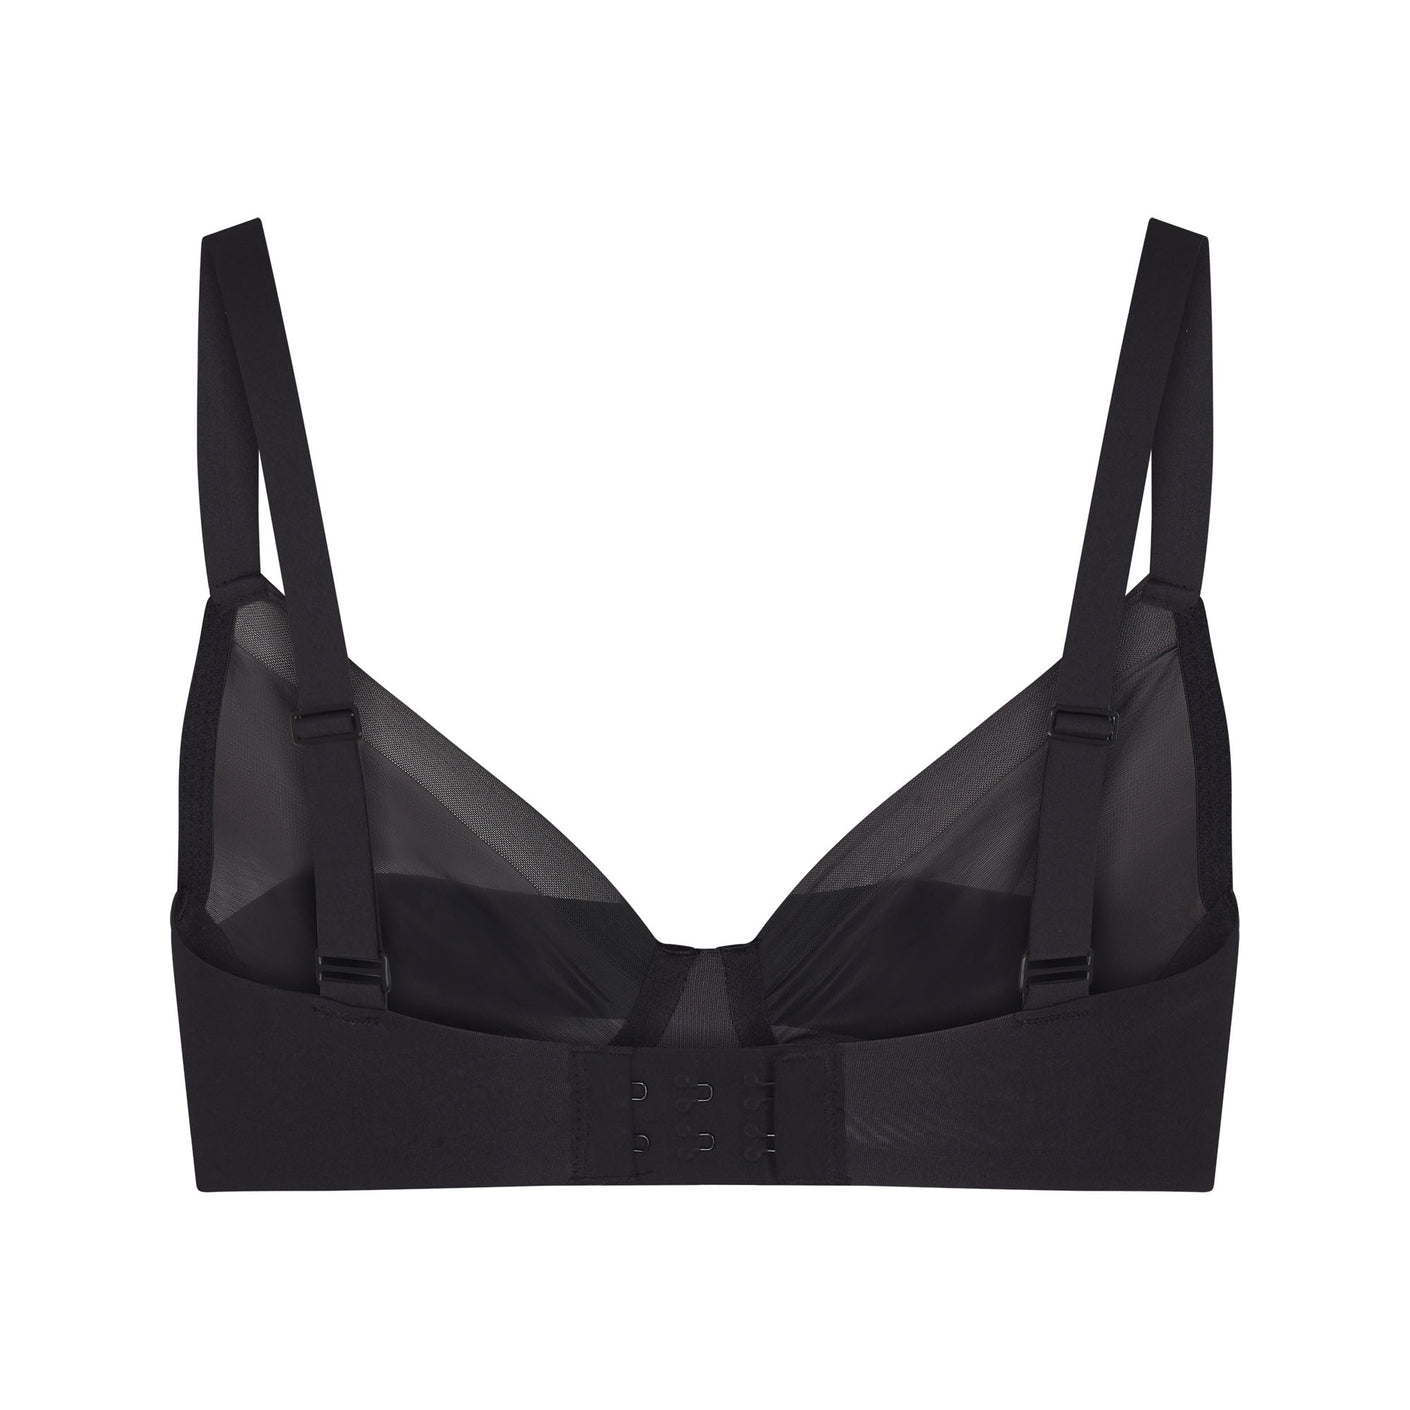 Track Skims Lace Unlined Balconette Bra - Onyx - 36 - A at Skims